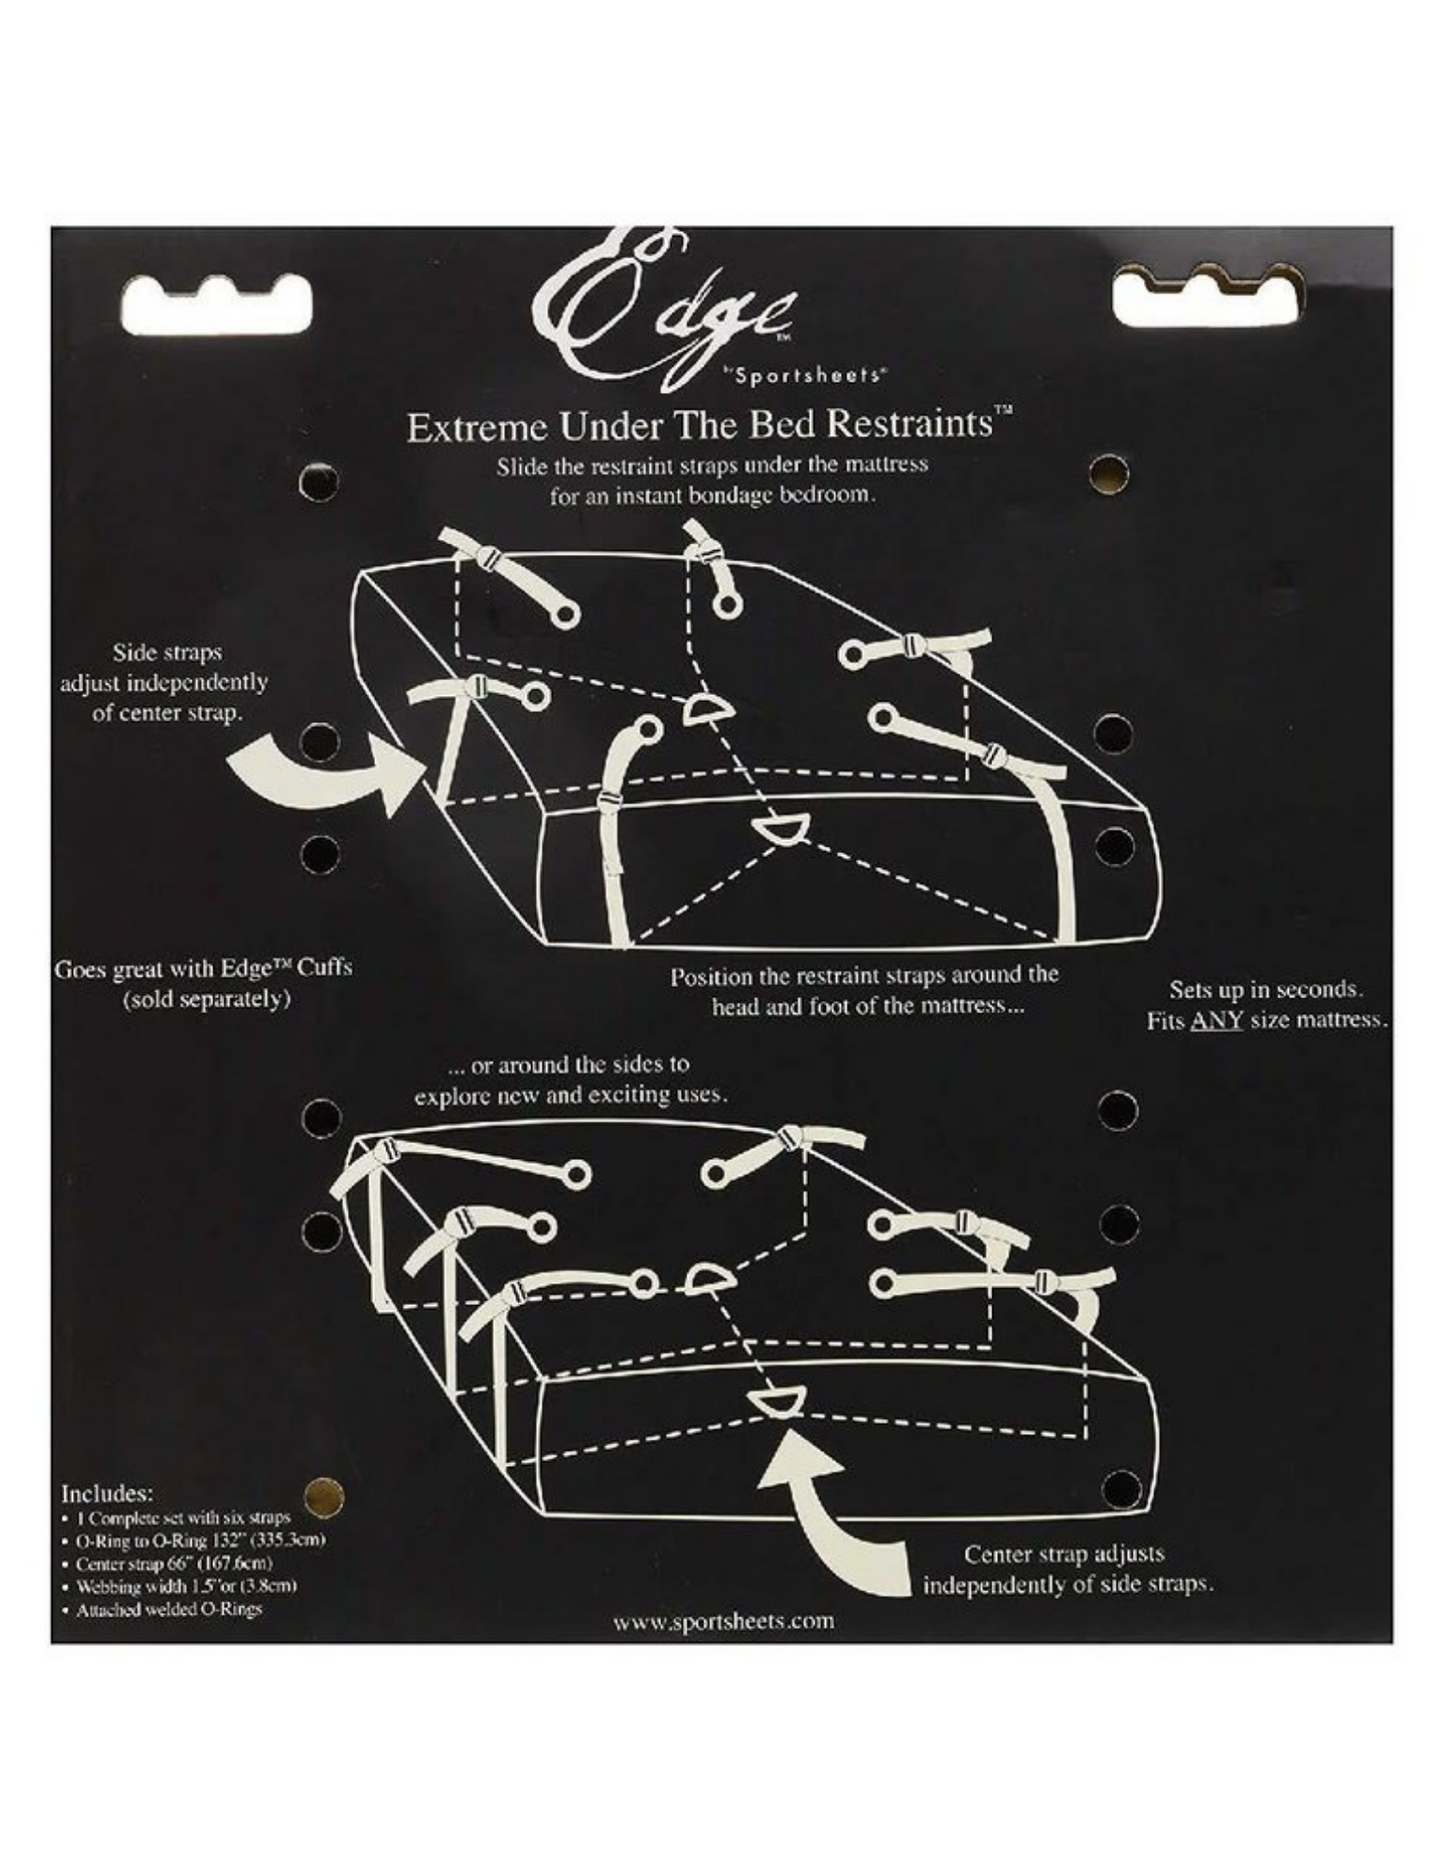 Photo of the back of the package for the Sportsheets Edge Extreme Under the Bed Restraints shows how to place it in between the mattresses.